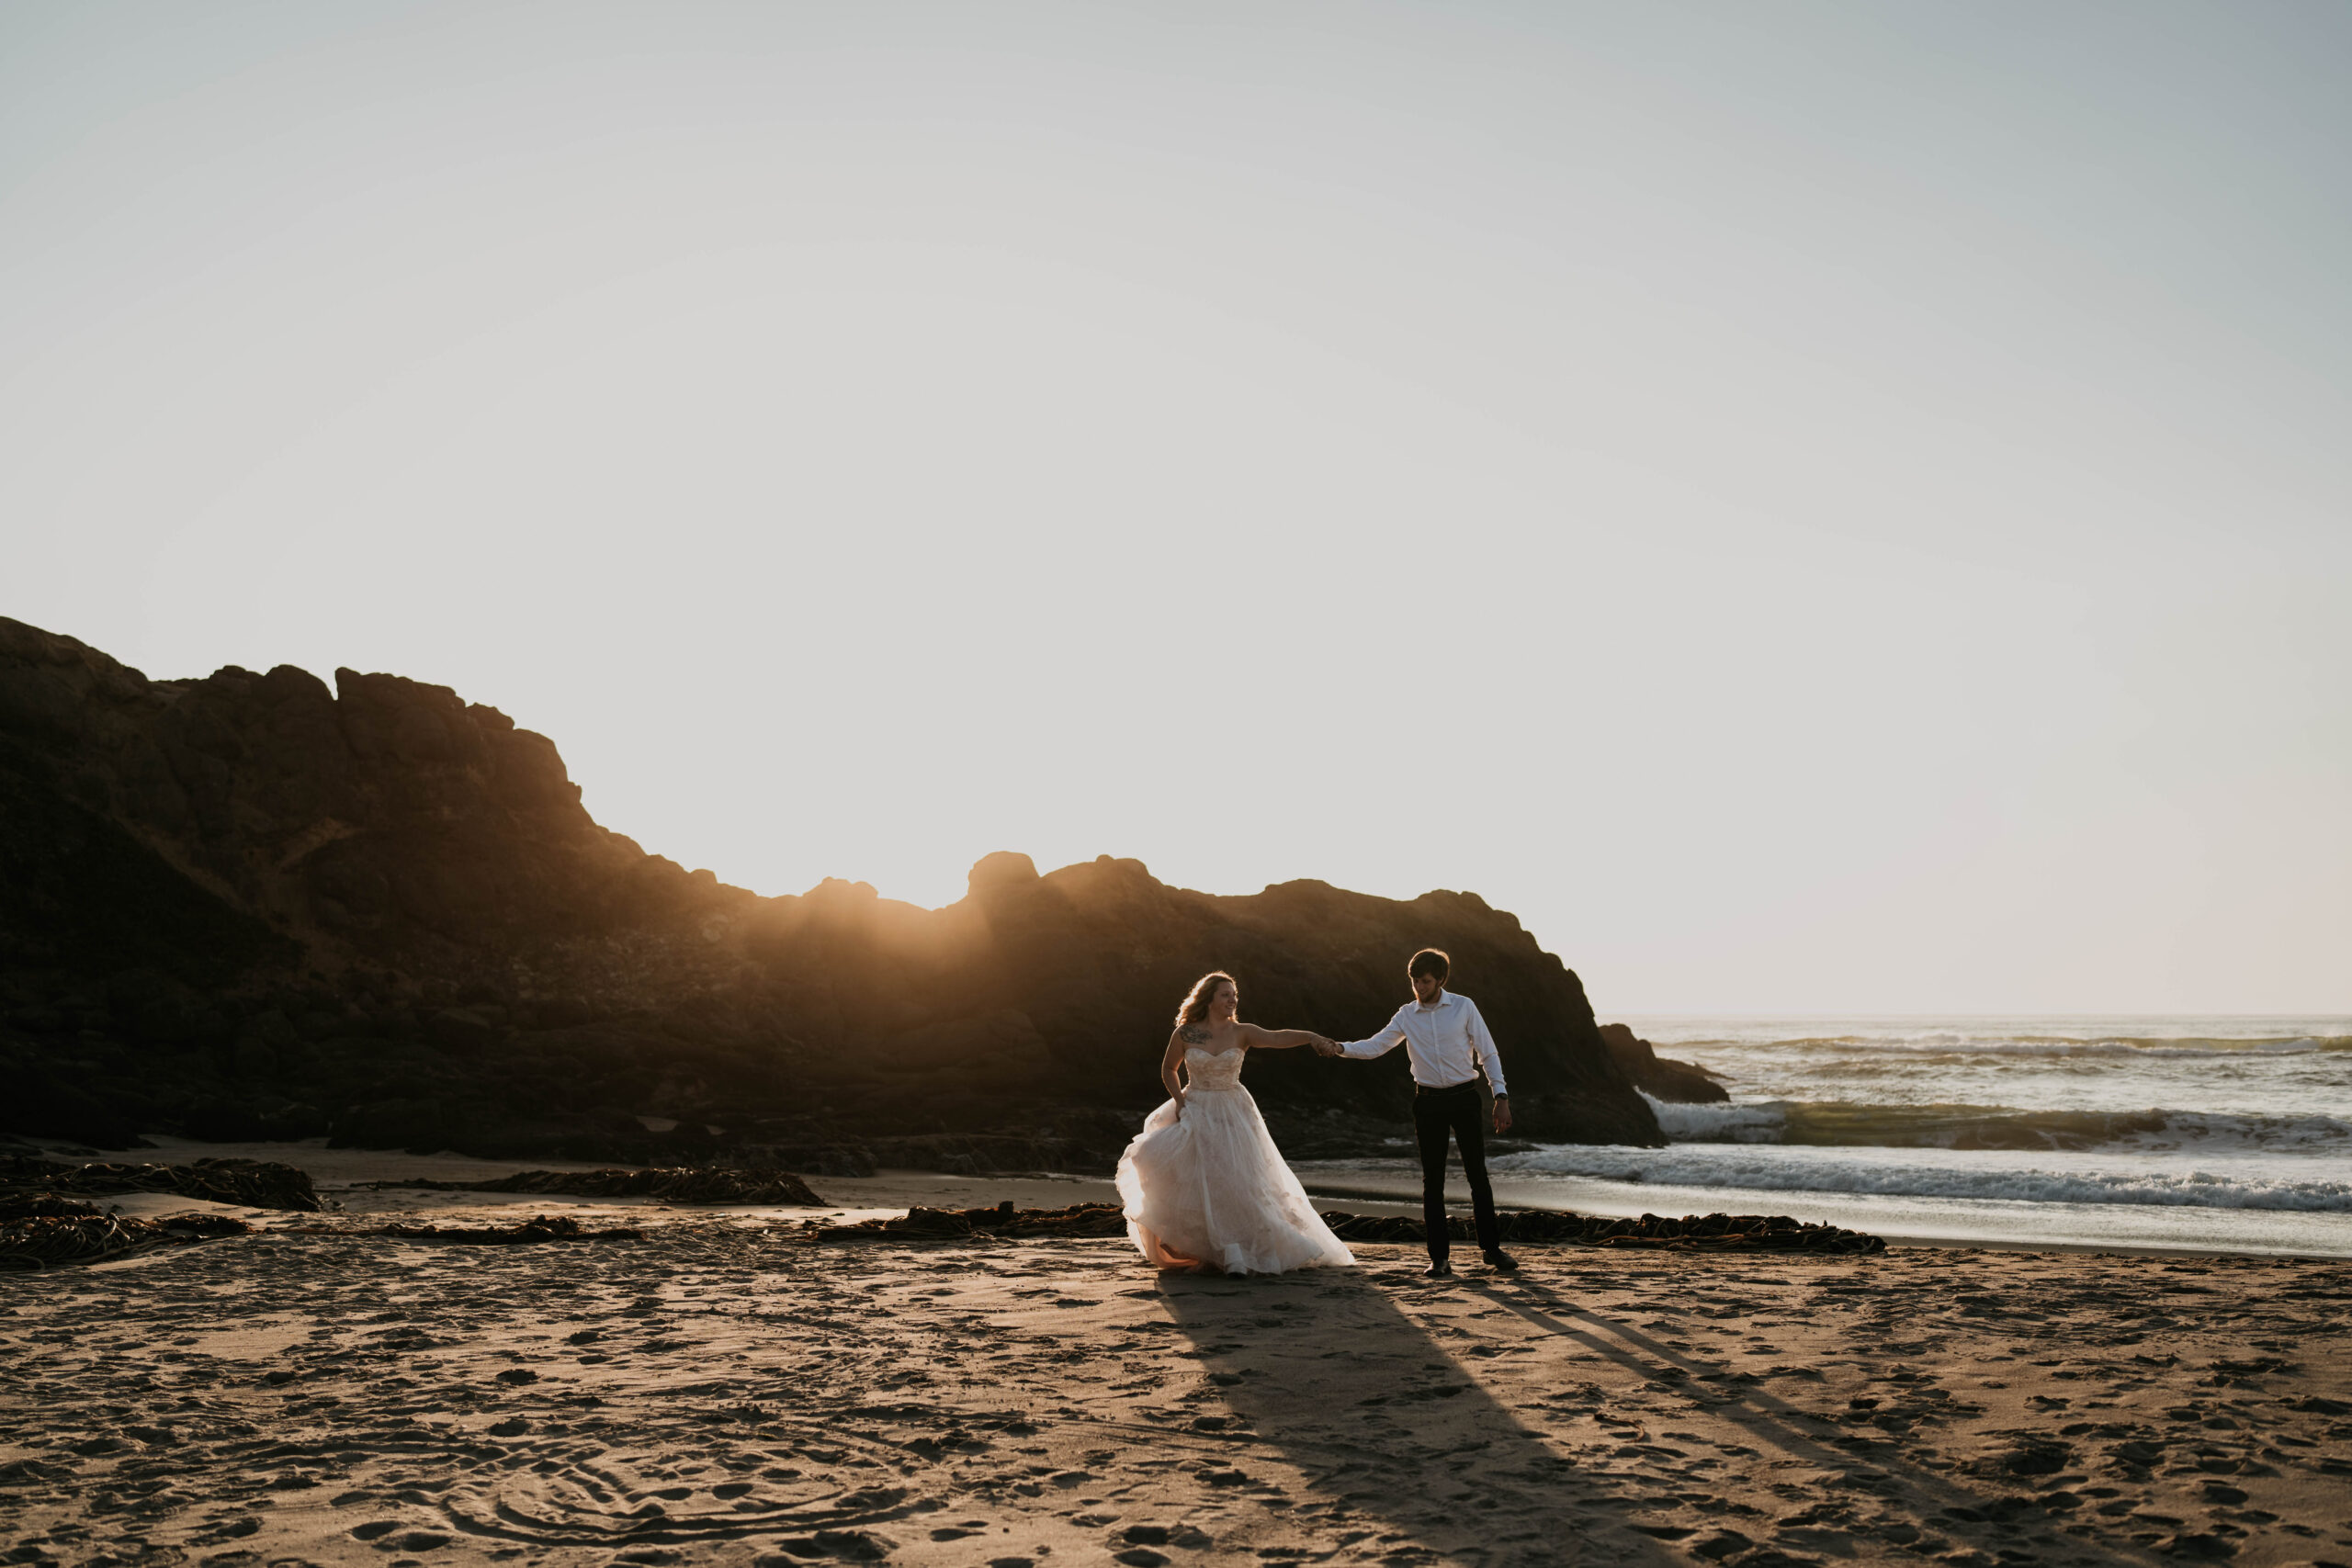 bride and groom holding hands running on beach in sunset